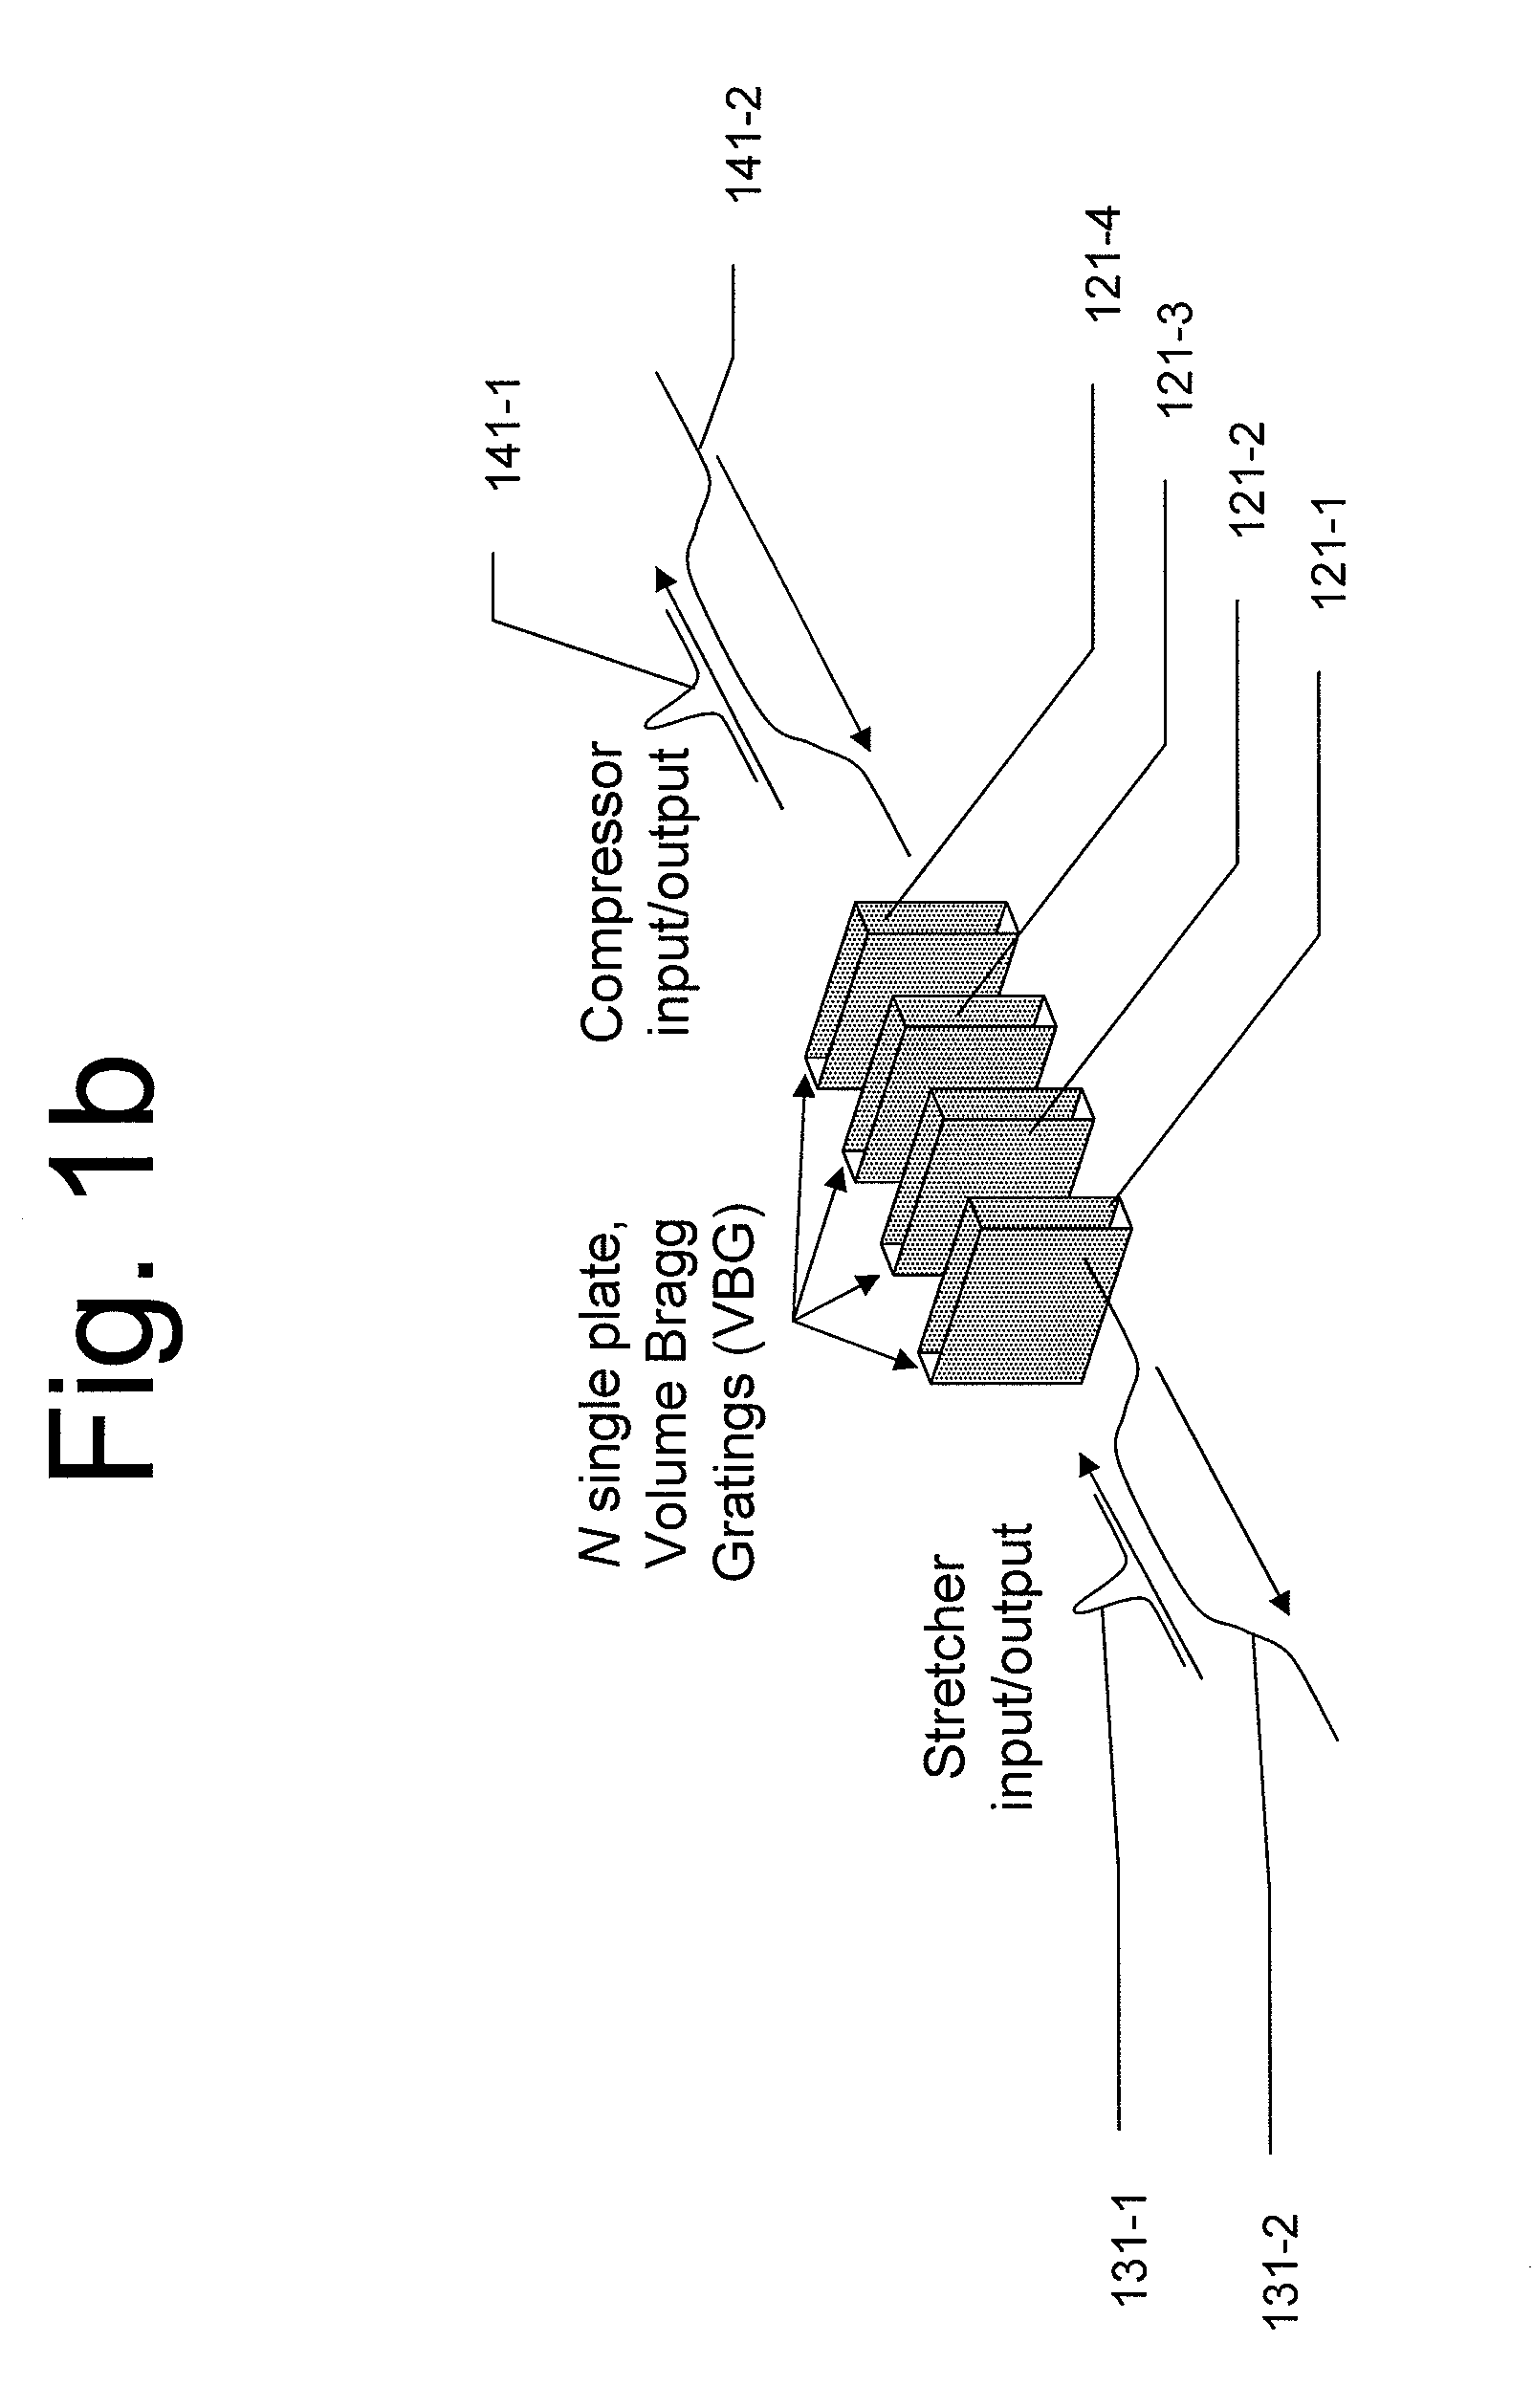 Multi-plate composite volume bragg gratings, systems and methods of use thereof